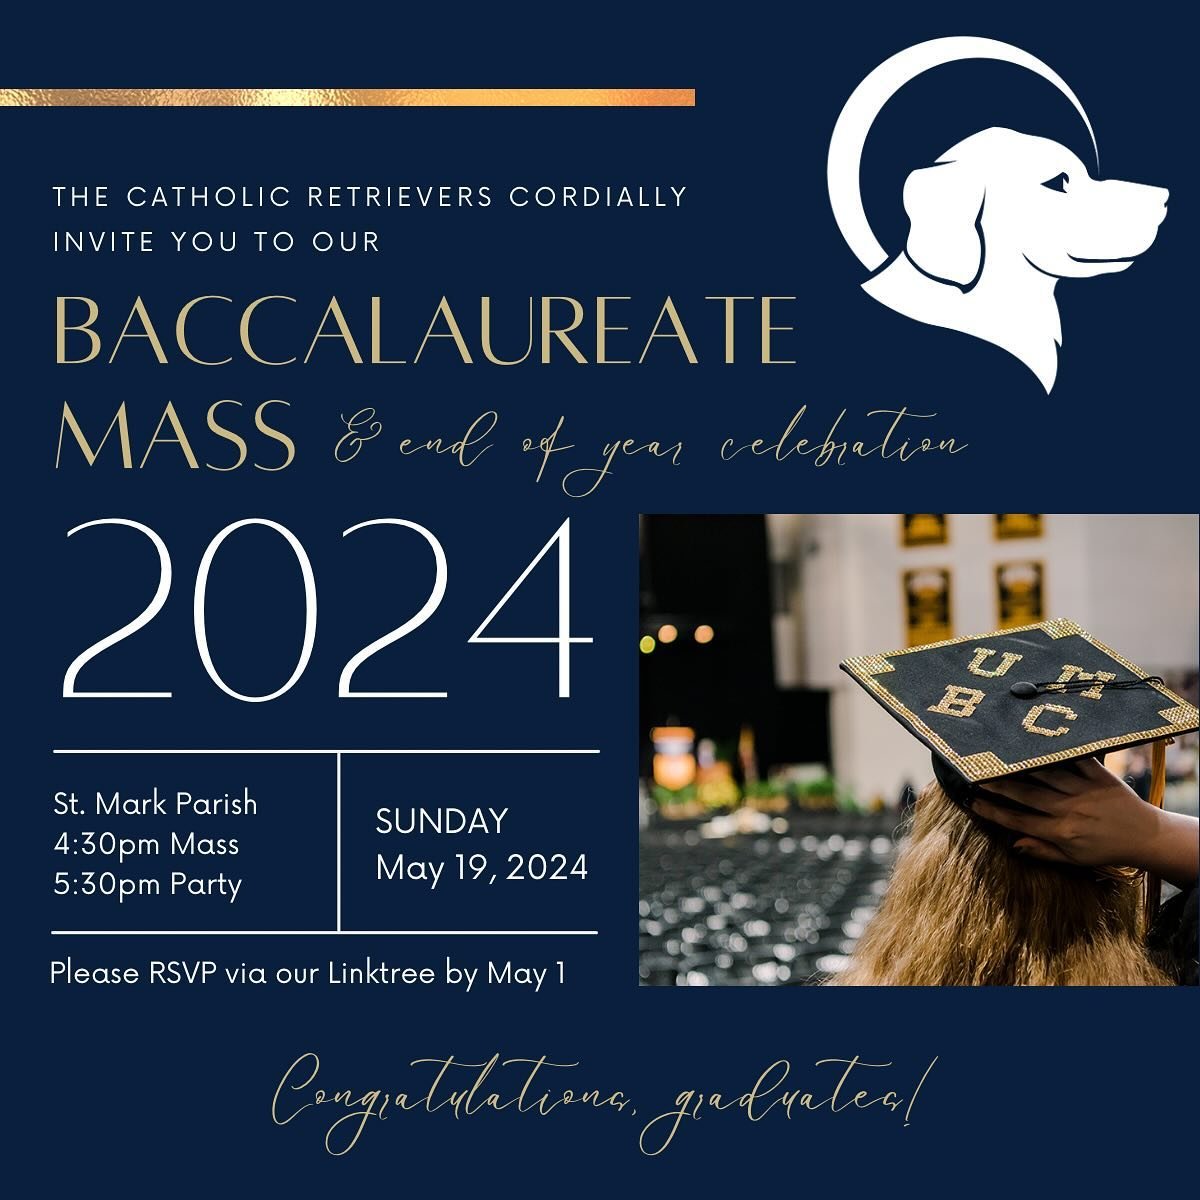 SENIORS!! Baccalaureate Mass and Senior Night are coming up!! Sign up NOW in the Linktree to attend these events as we reach the end of the semester!